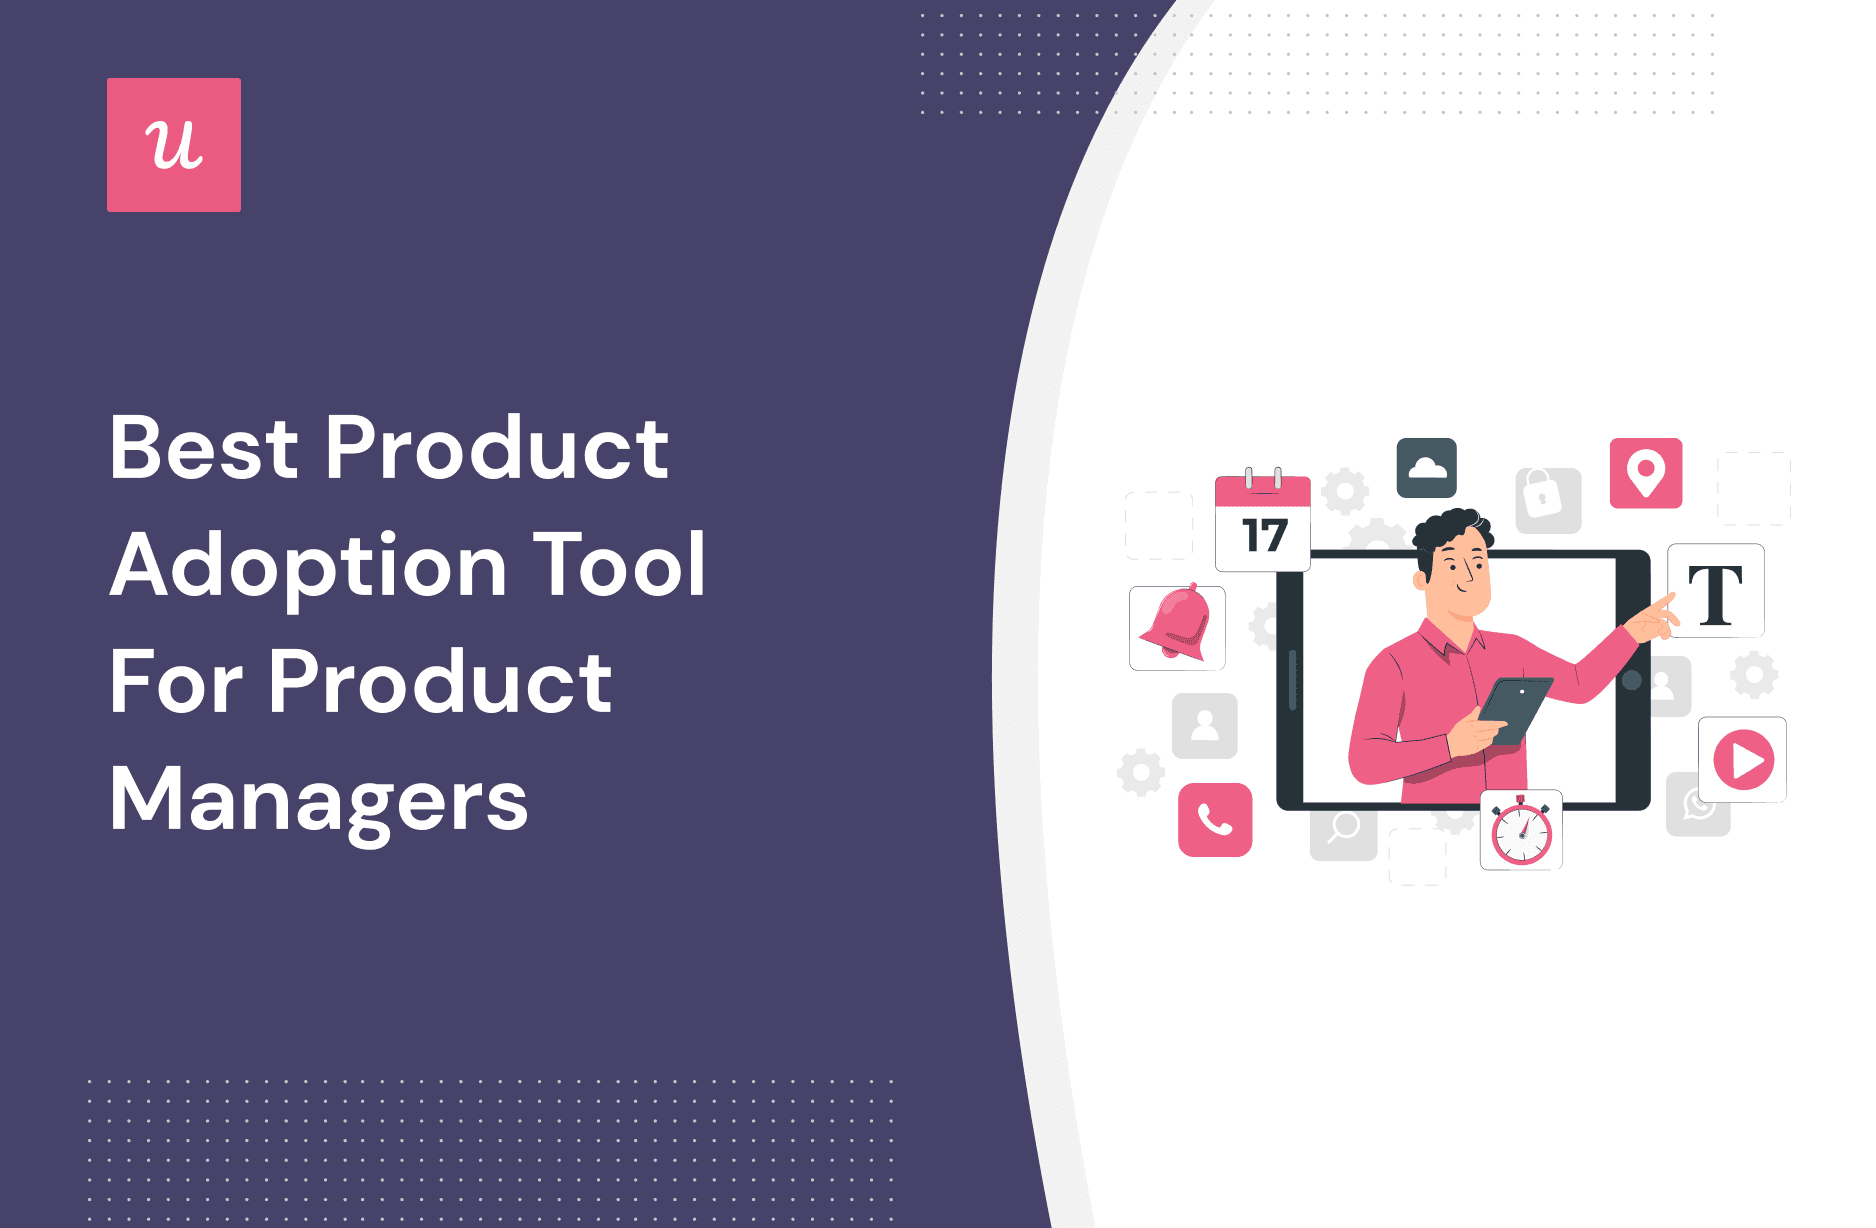 Best Product Adoption Tool For Product Managers cover